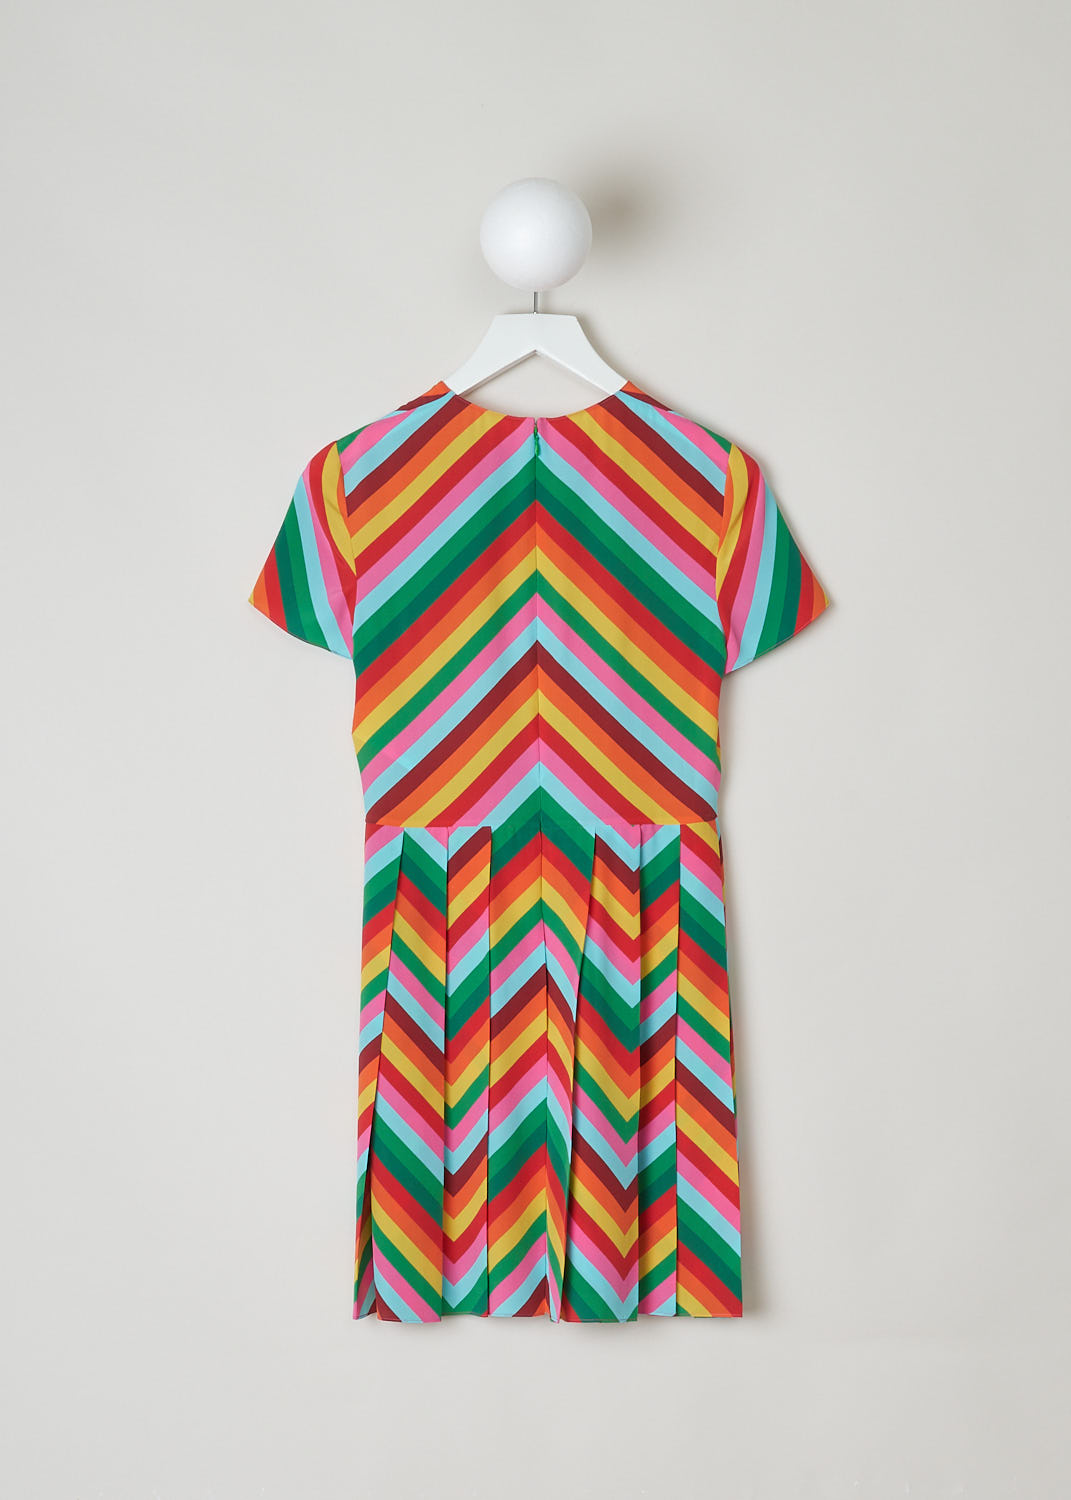 VALENTINO, MULTICOLORED ZIGZAG PRINT DRESS, XB3VAY7170Q_M12, Print, Pink, Orange, Back, This short sleeve dress has a multicolored diagonal striped pattern. The dress has a round neckline. The form fitting bodice goed over in the knife pleated circle skirt. In the back, a concealed centre zip functions as the closure option.
